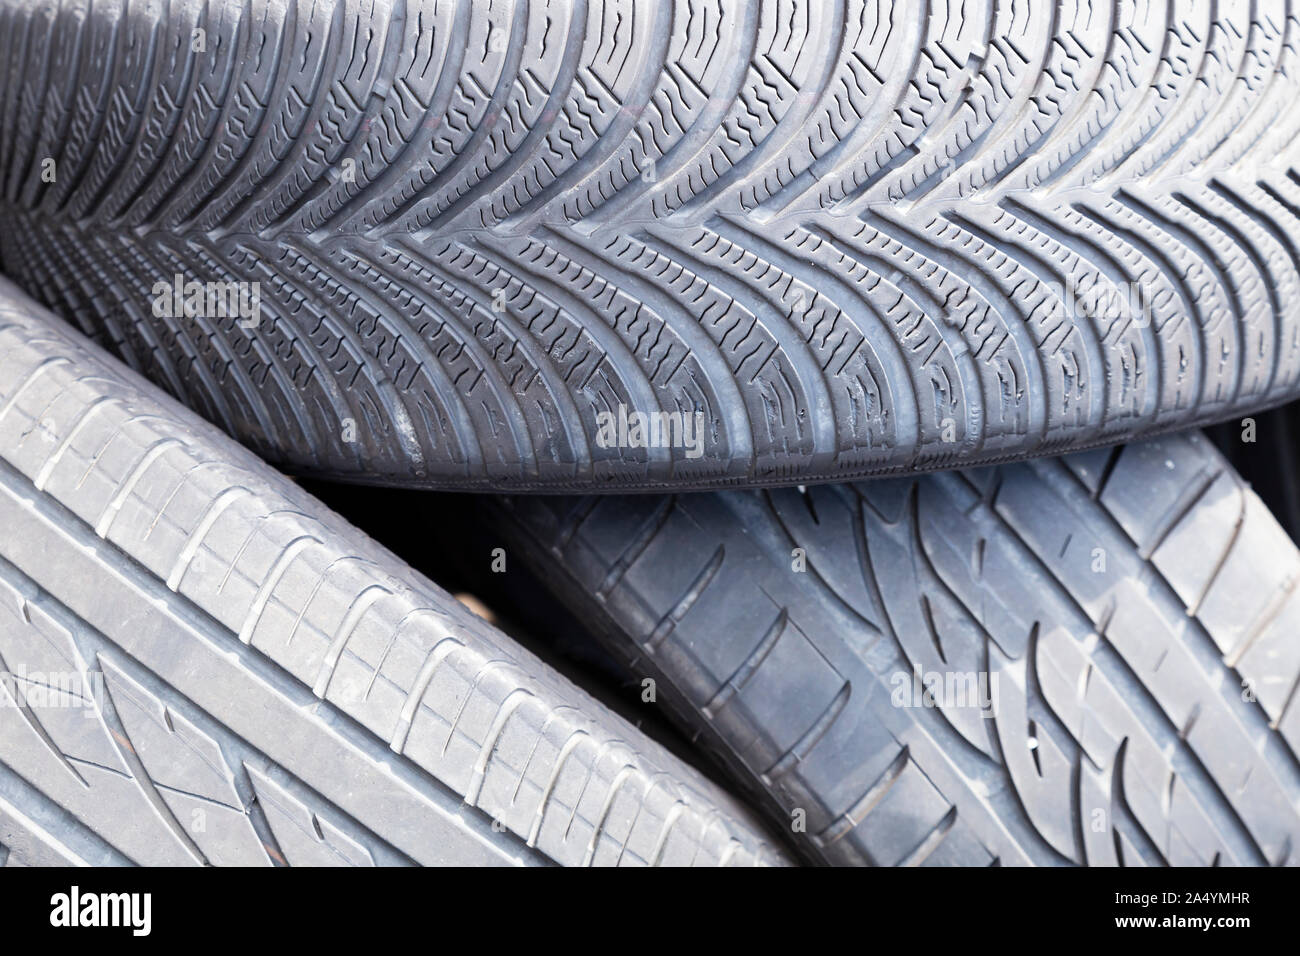 Close-up of used and old car tires with worn down treads randomly piled up in a stack Stock Photo